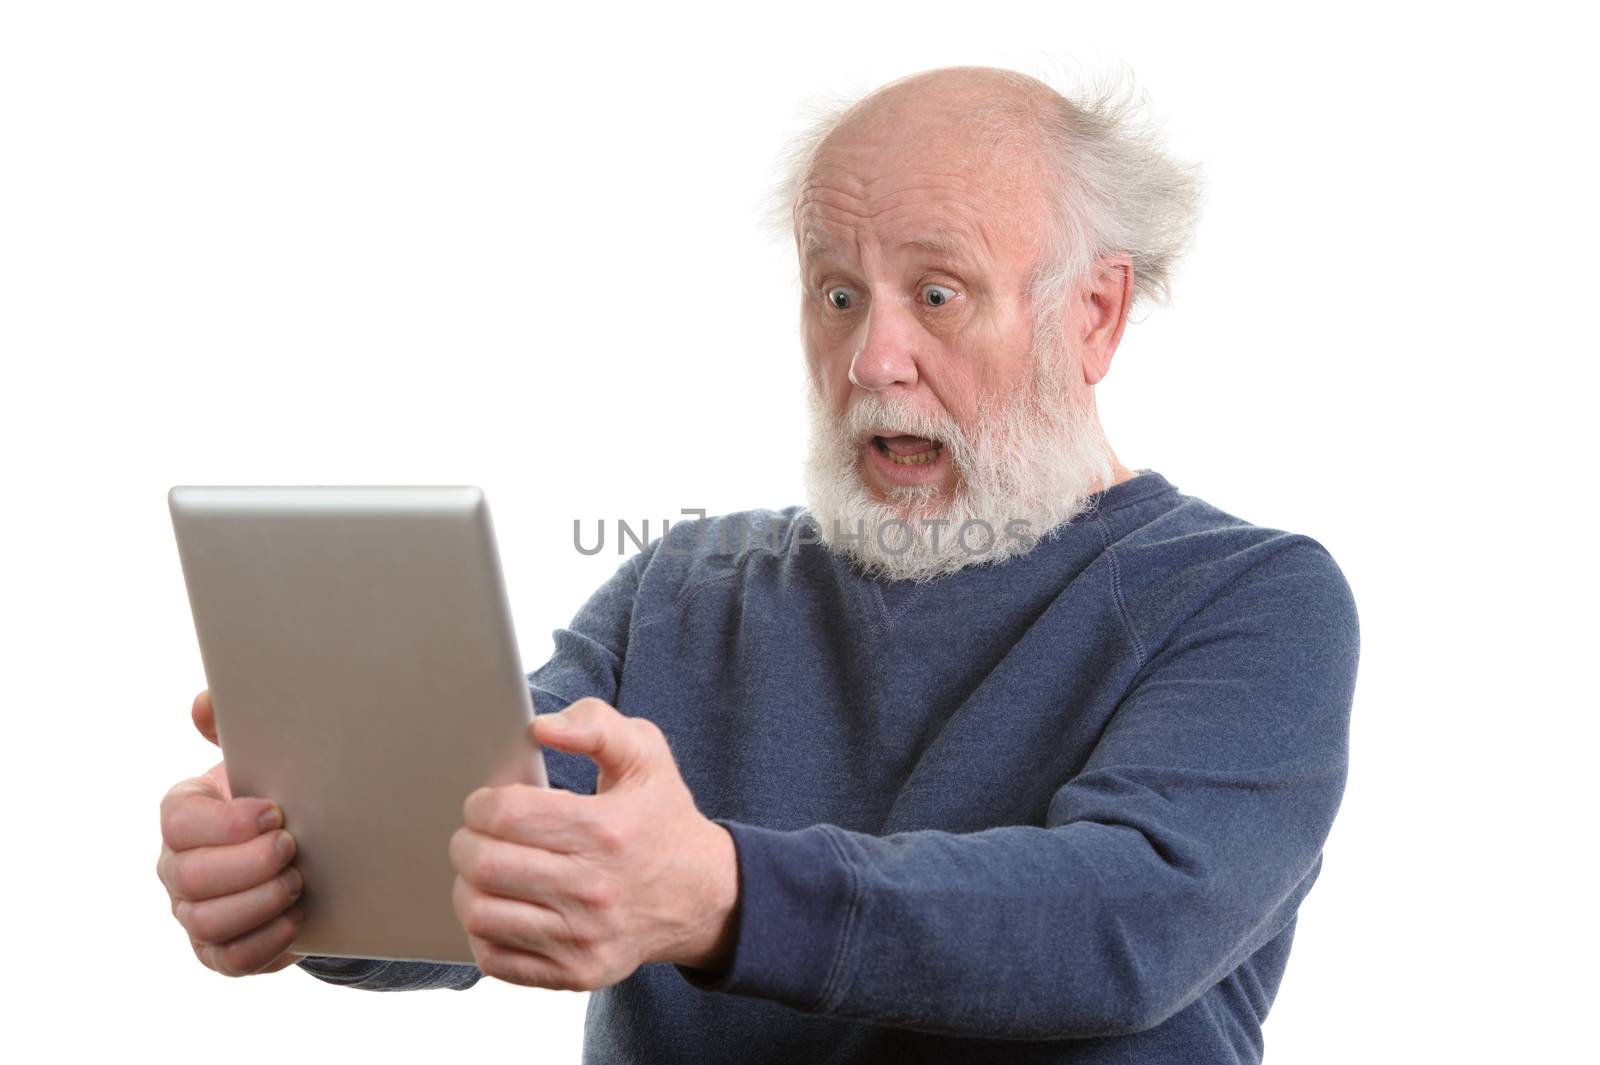 Funny shocked astonished old man using tablet computer, isolated on white